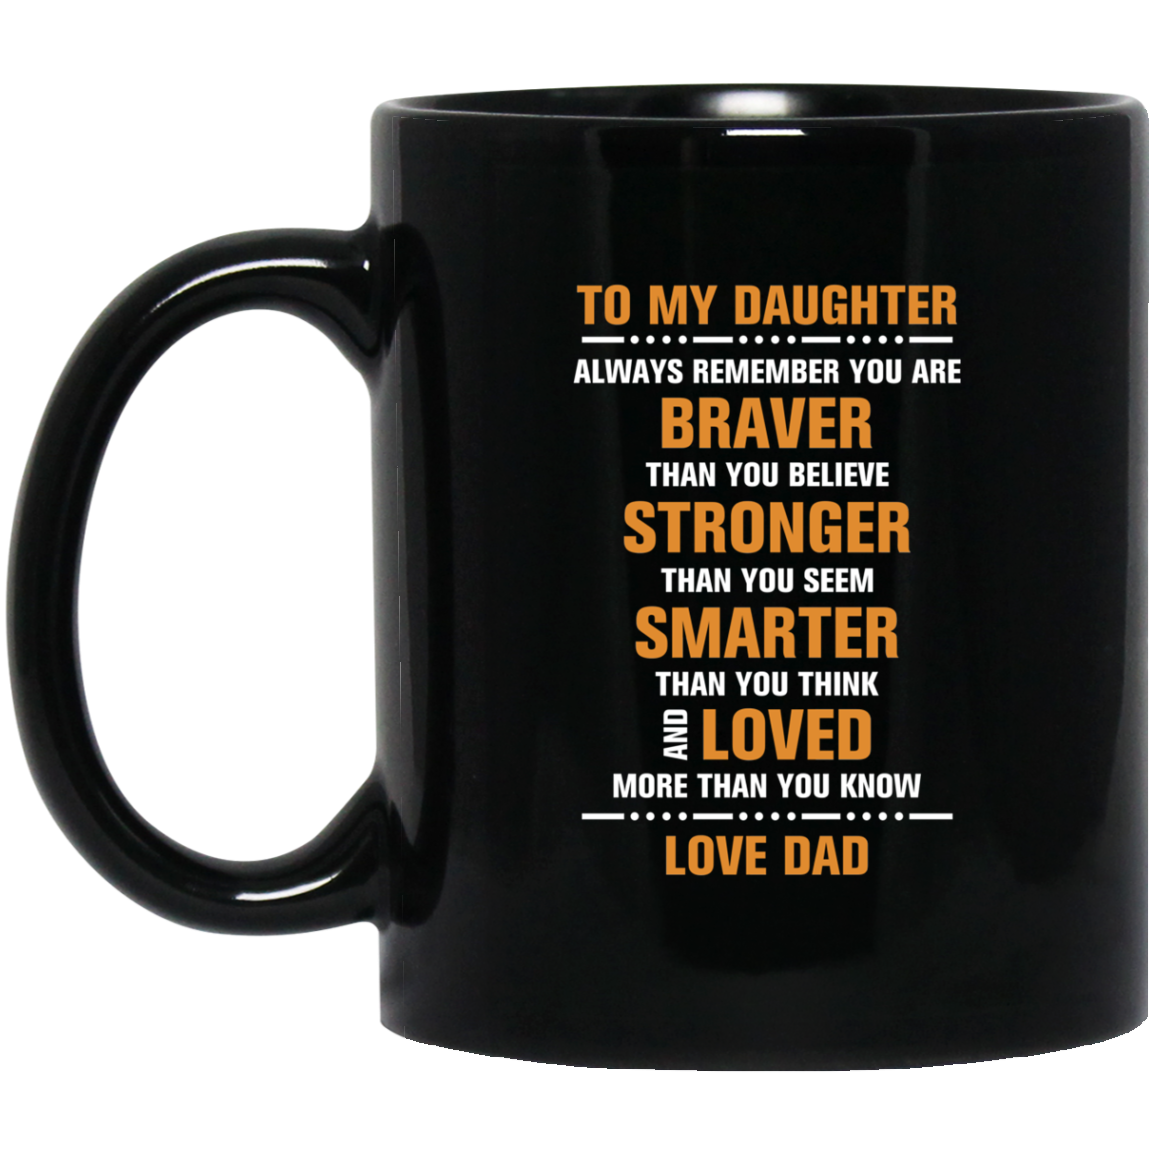 To my daughter - Always remember you are braver than you ...